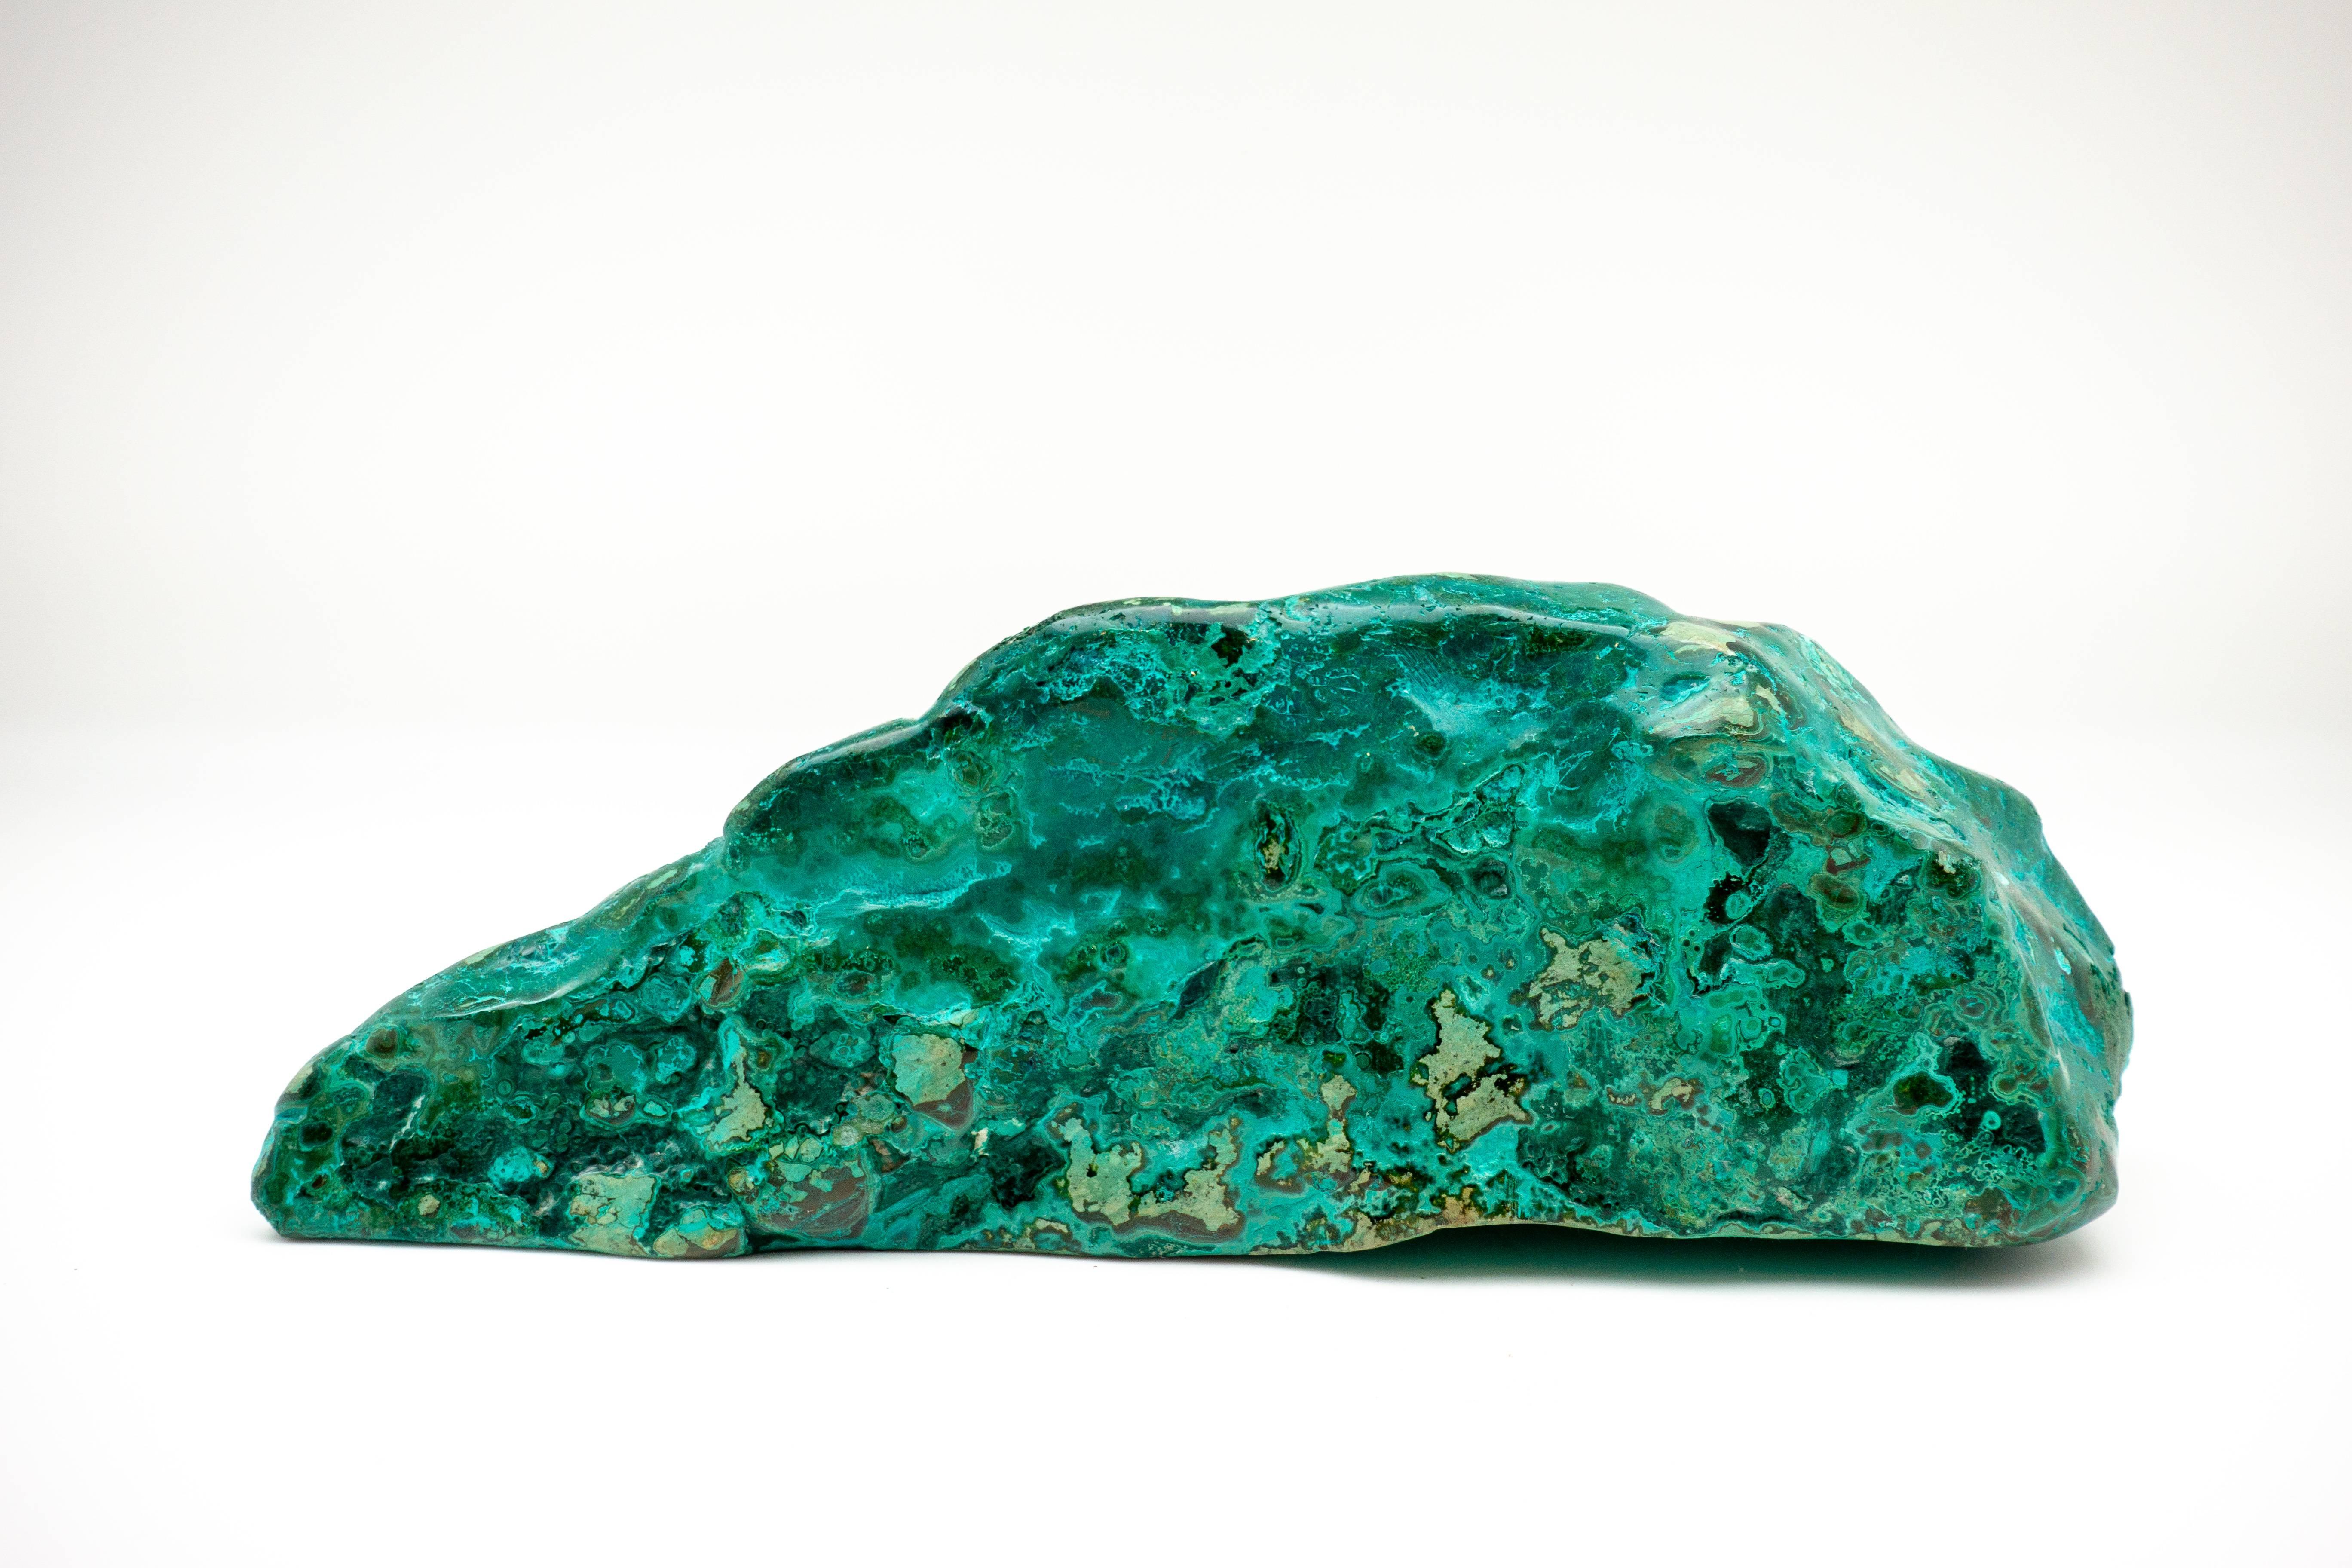 Richly marbled chrysocolla-malachite specimen with a vibrant emerald color. The beautiful blue-green of chrysocolla has made it a prized gemstone in ornamental use since antiquity.